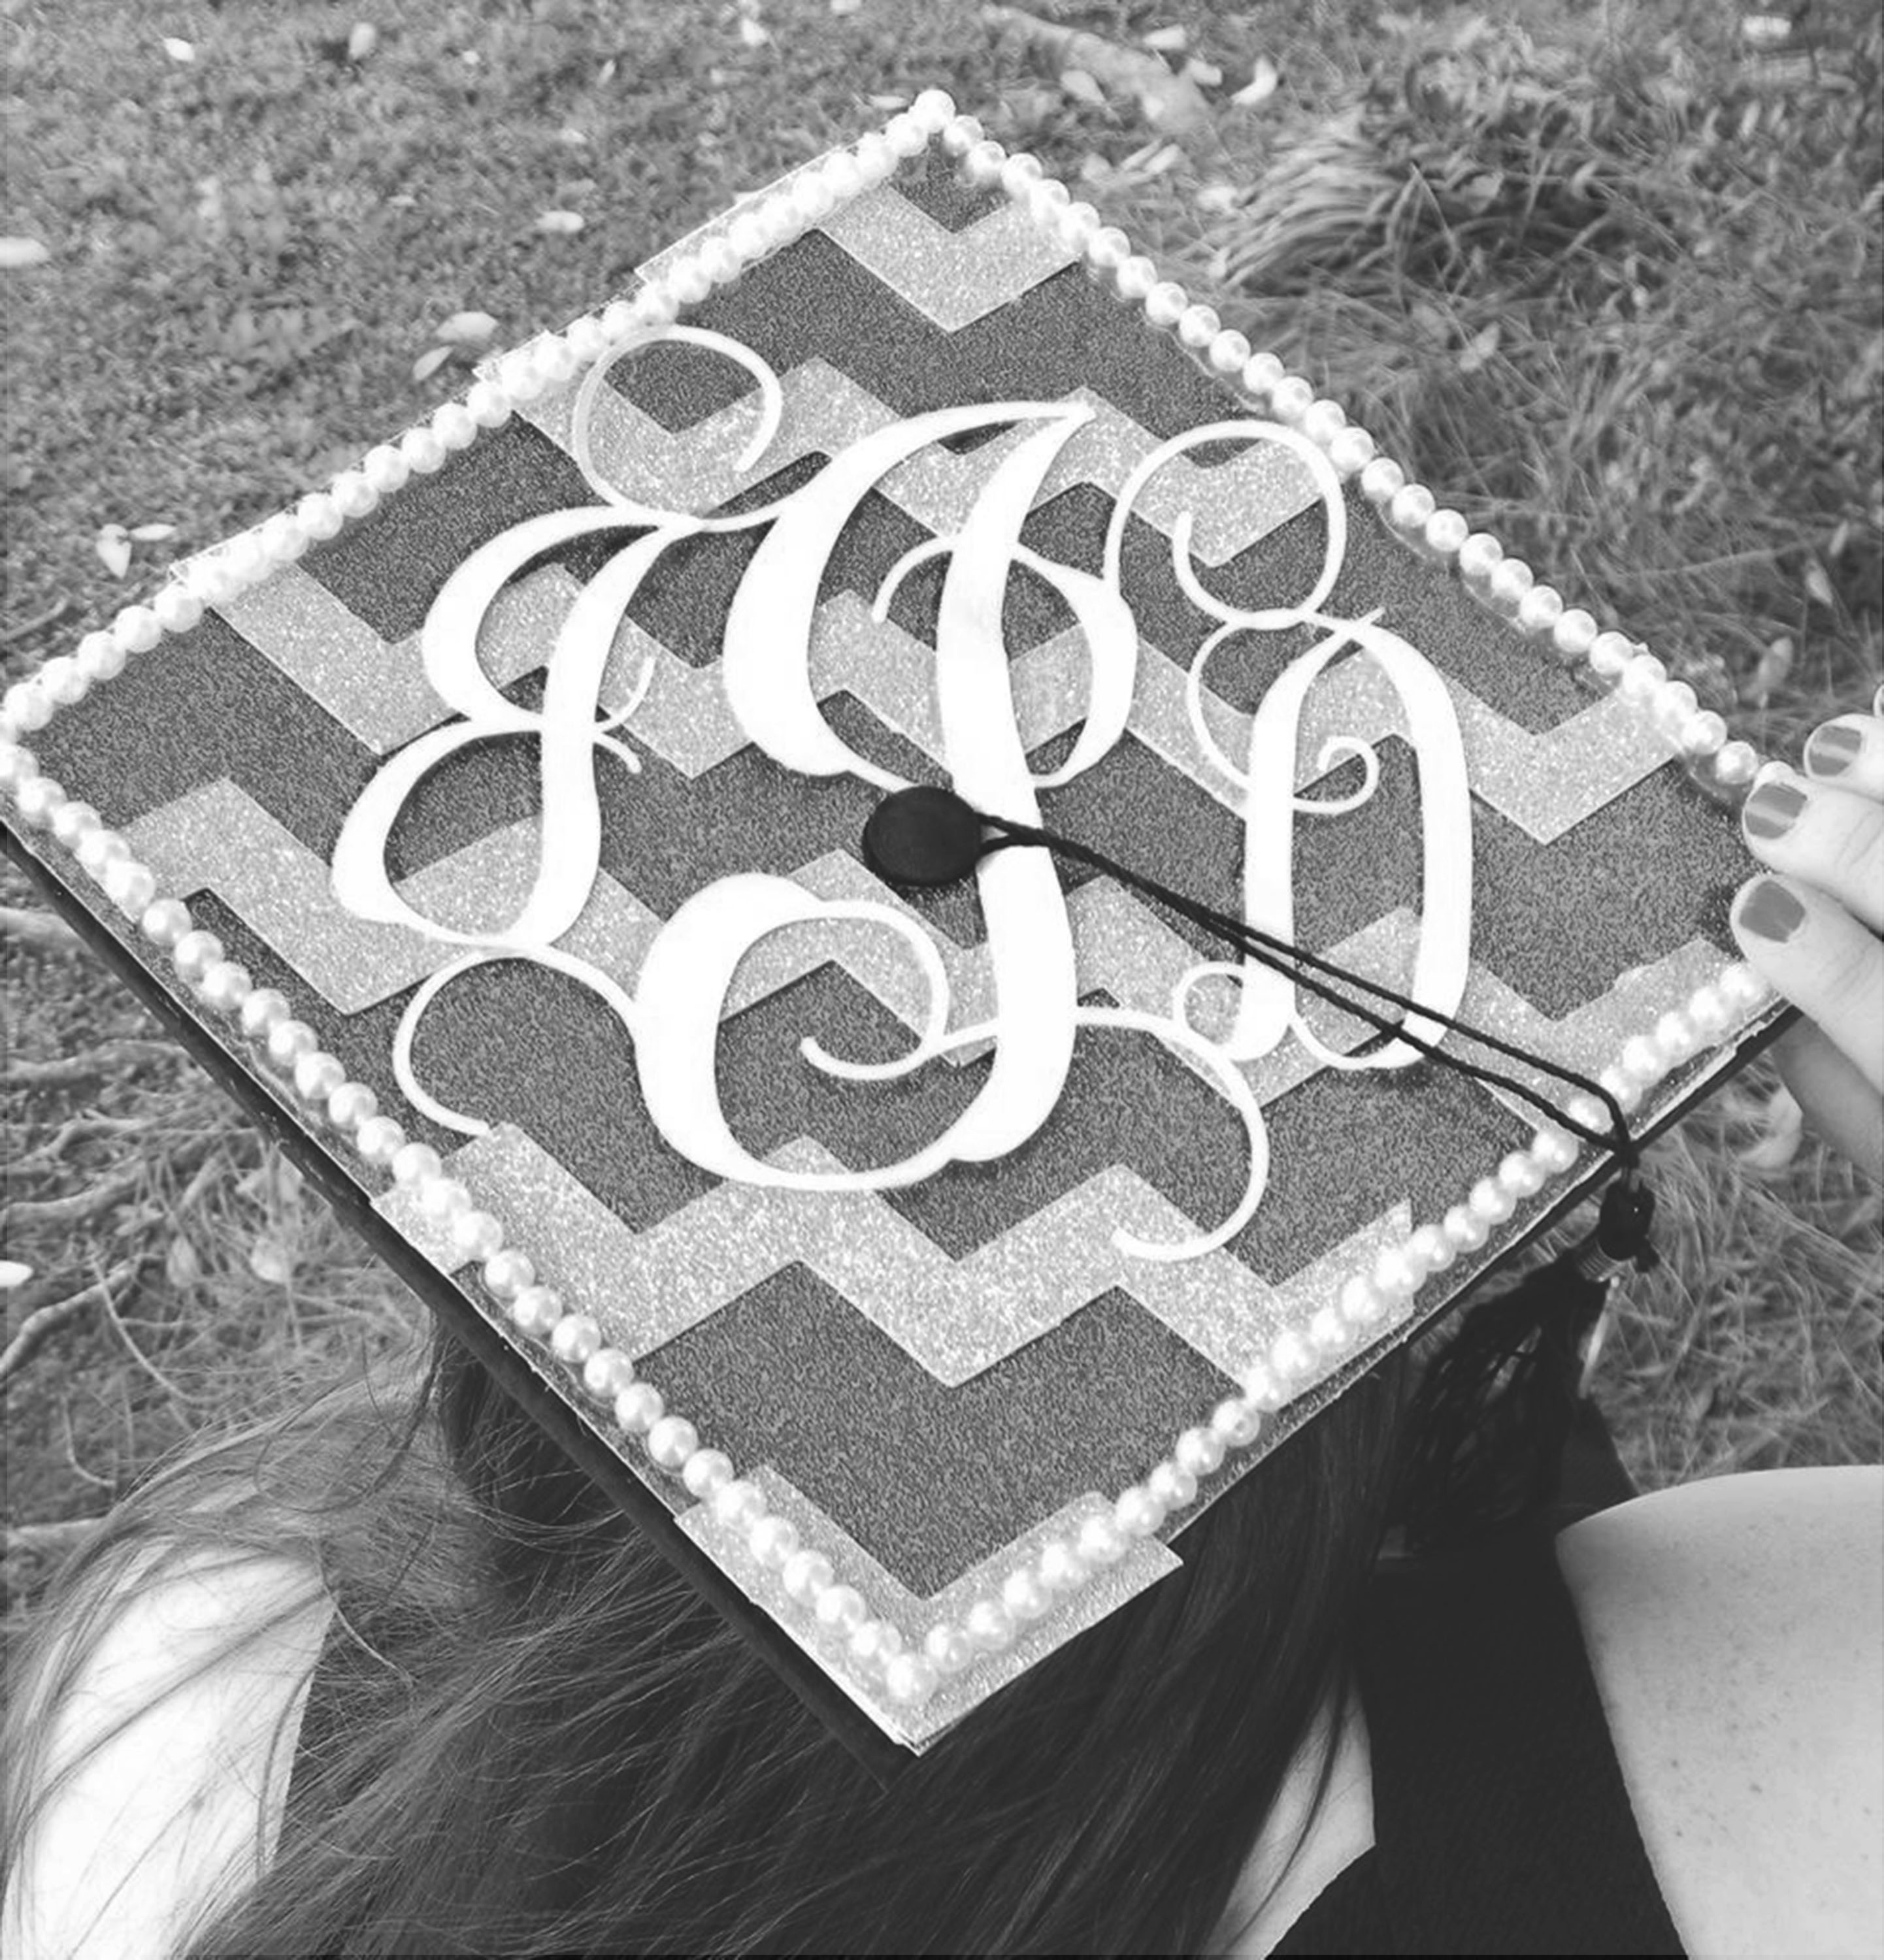 Decorated Graduation Caps Express Individuality The Spectator